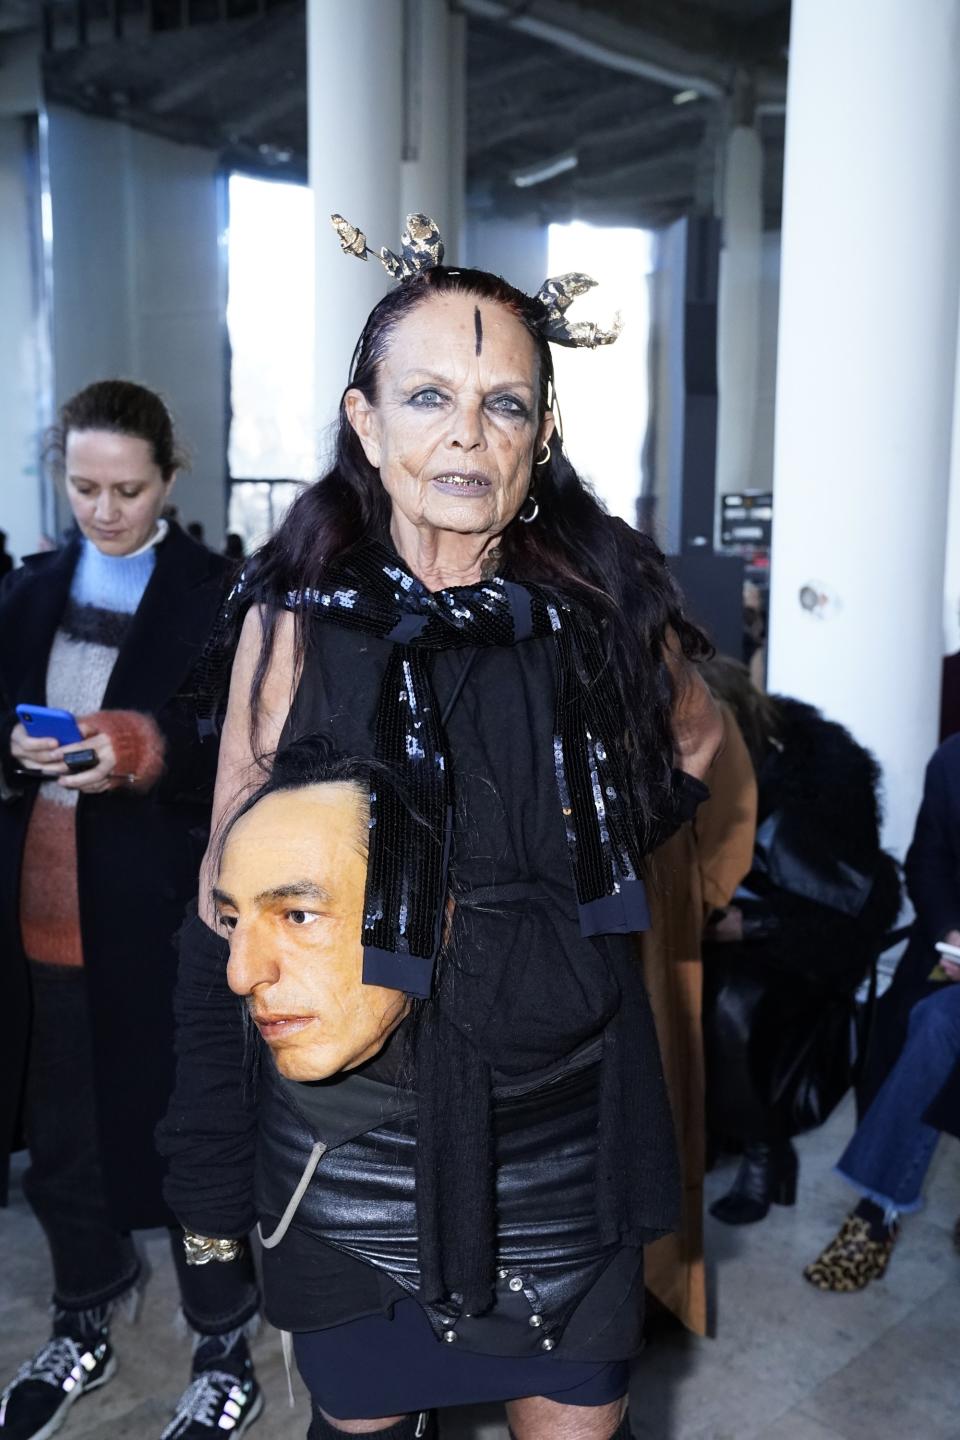 Totally weird and perfectly funny: Michèle Lamy at the Rick Owens show, carrying Rick Owens's head. Photo by Peter White/Getty Images.